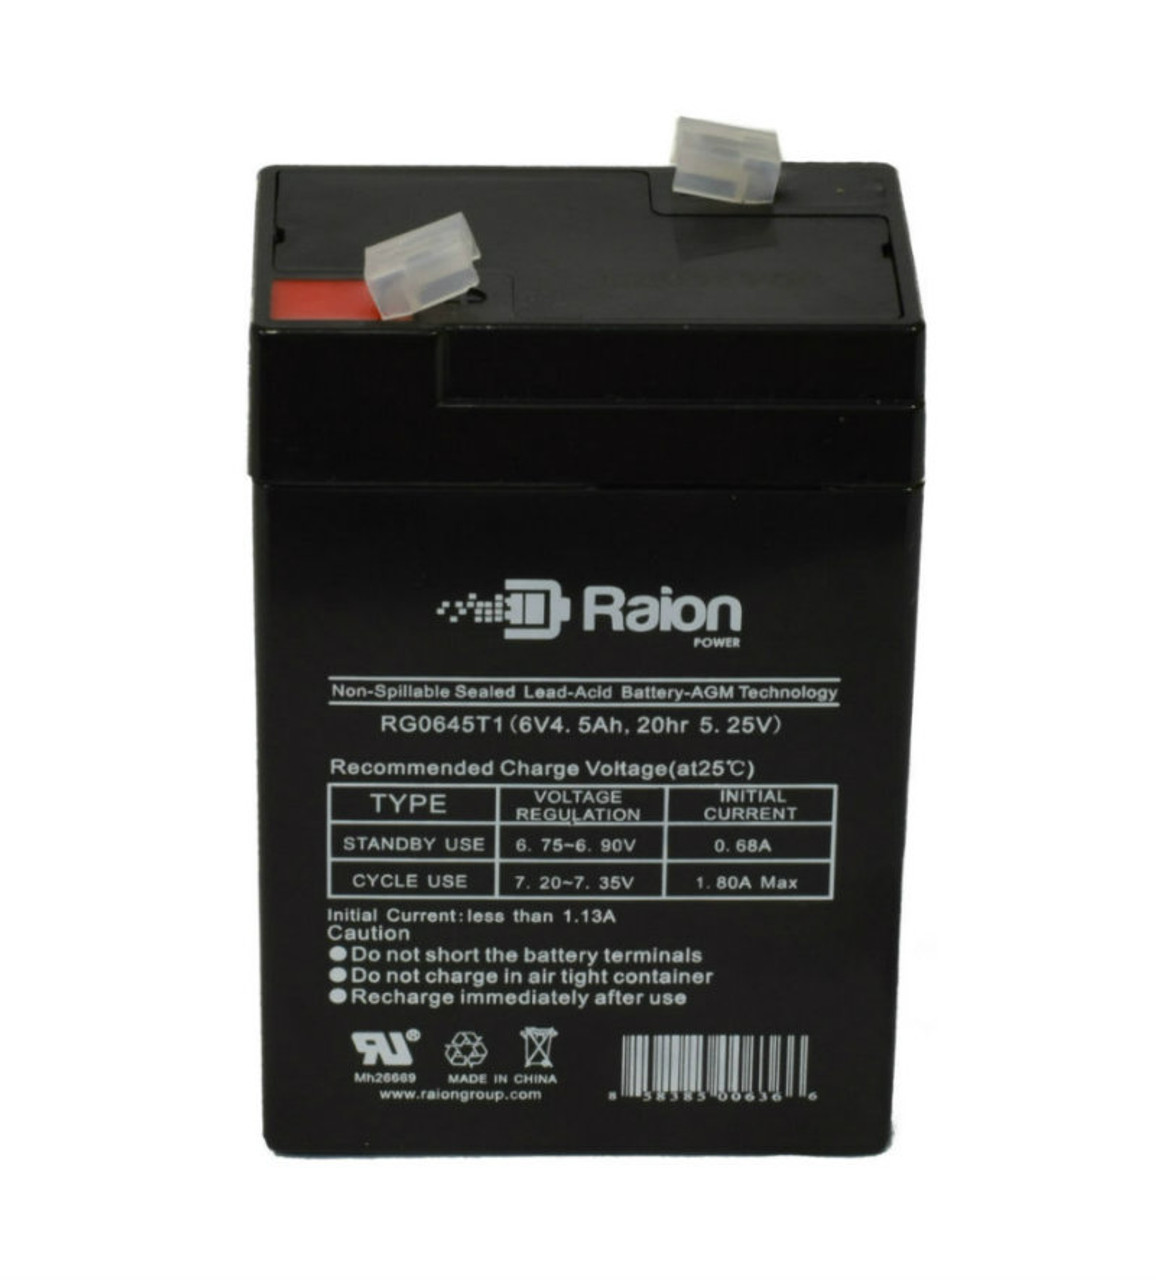 Raion Power RG0645T1 Replacement Battery Cartridge for Panasonic LCRB064P